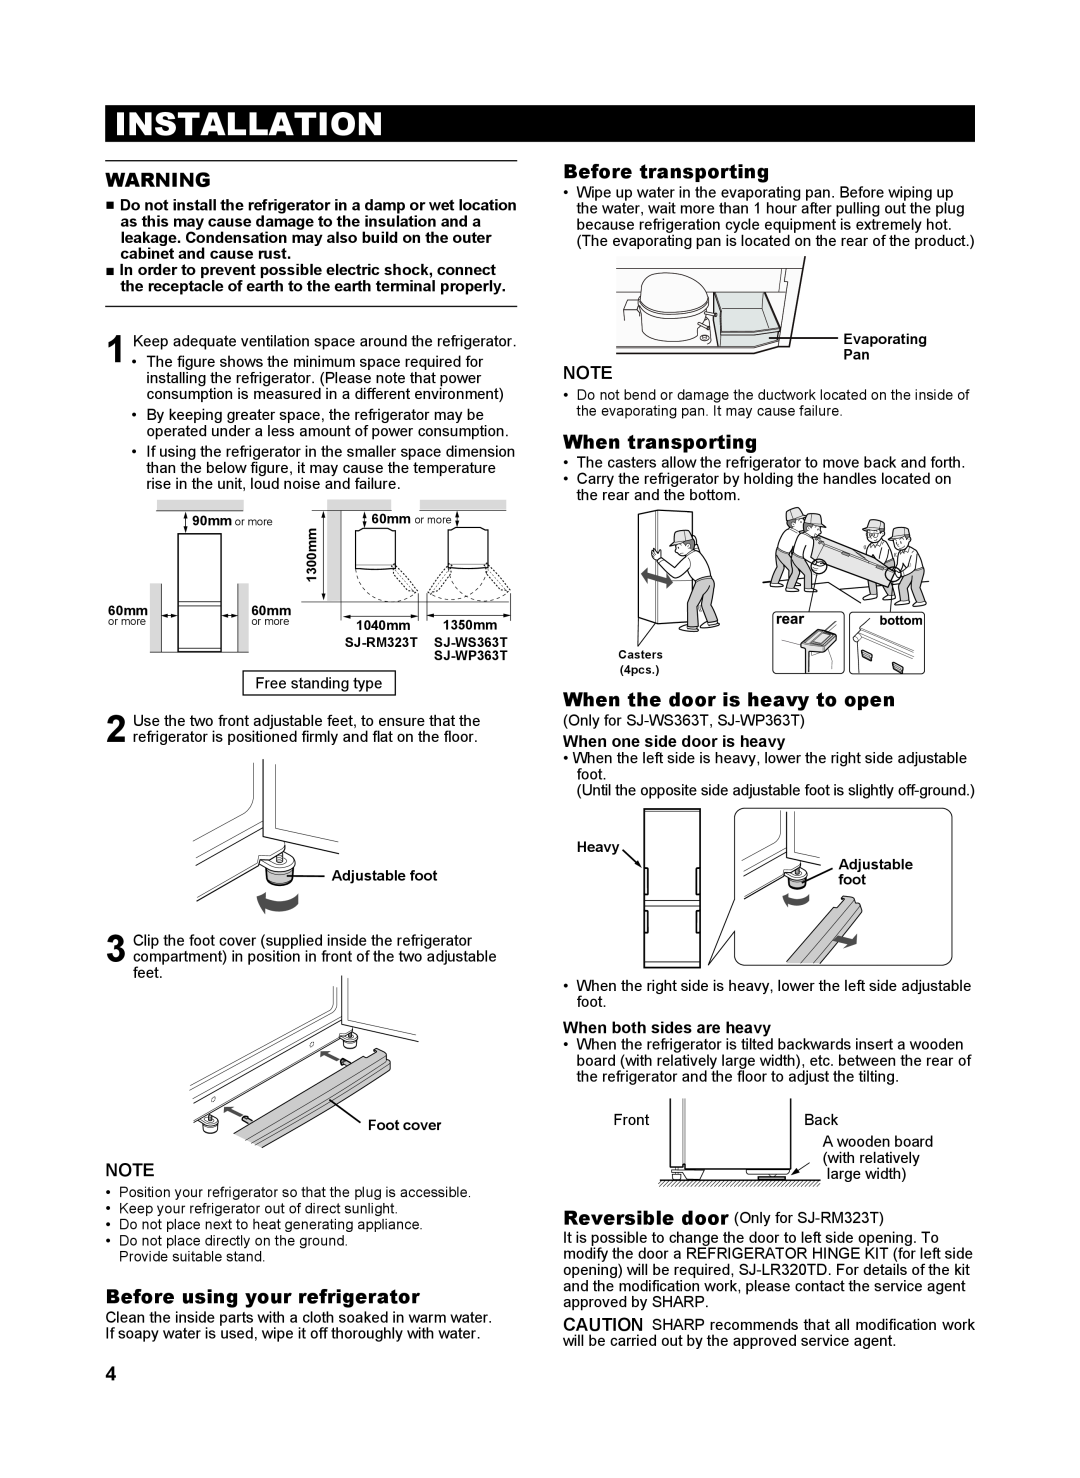 Sharp SJ-WS363T operation manual Installation, Before using your refrigerator, Before transporting, When transporting 